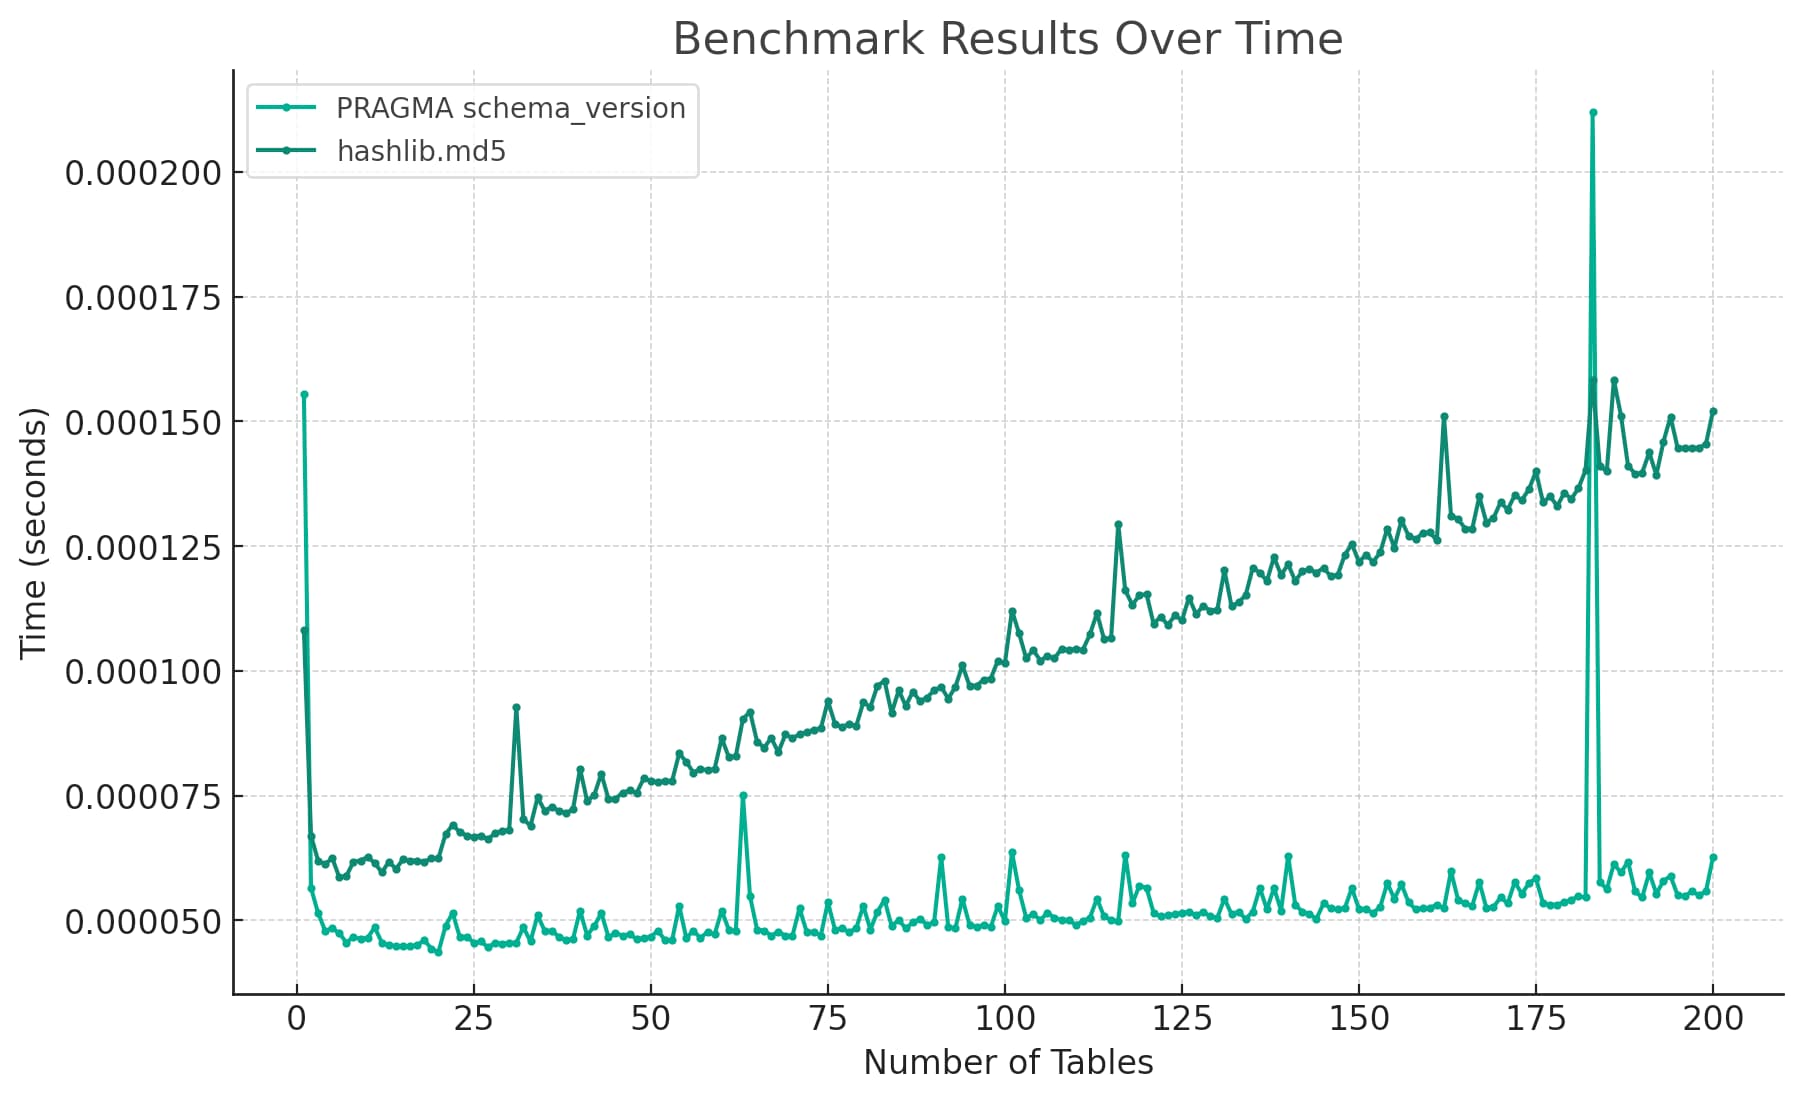 Benchmark Results Over Time - two lines, one for PRAGMA schema_version and one for hashlib.md5. The axis are time in seconds and number of tables - the hashlib.md5 line climes from around 0.000075 to 0.000150 after 200 tables have been created, while the PRAGMA schema_version line stays almost flat at 0.000050 at the bottom of the chart. It's a good chart: well labelled, easy to read.